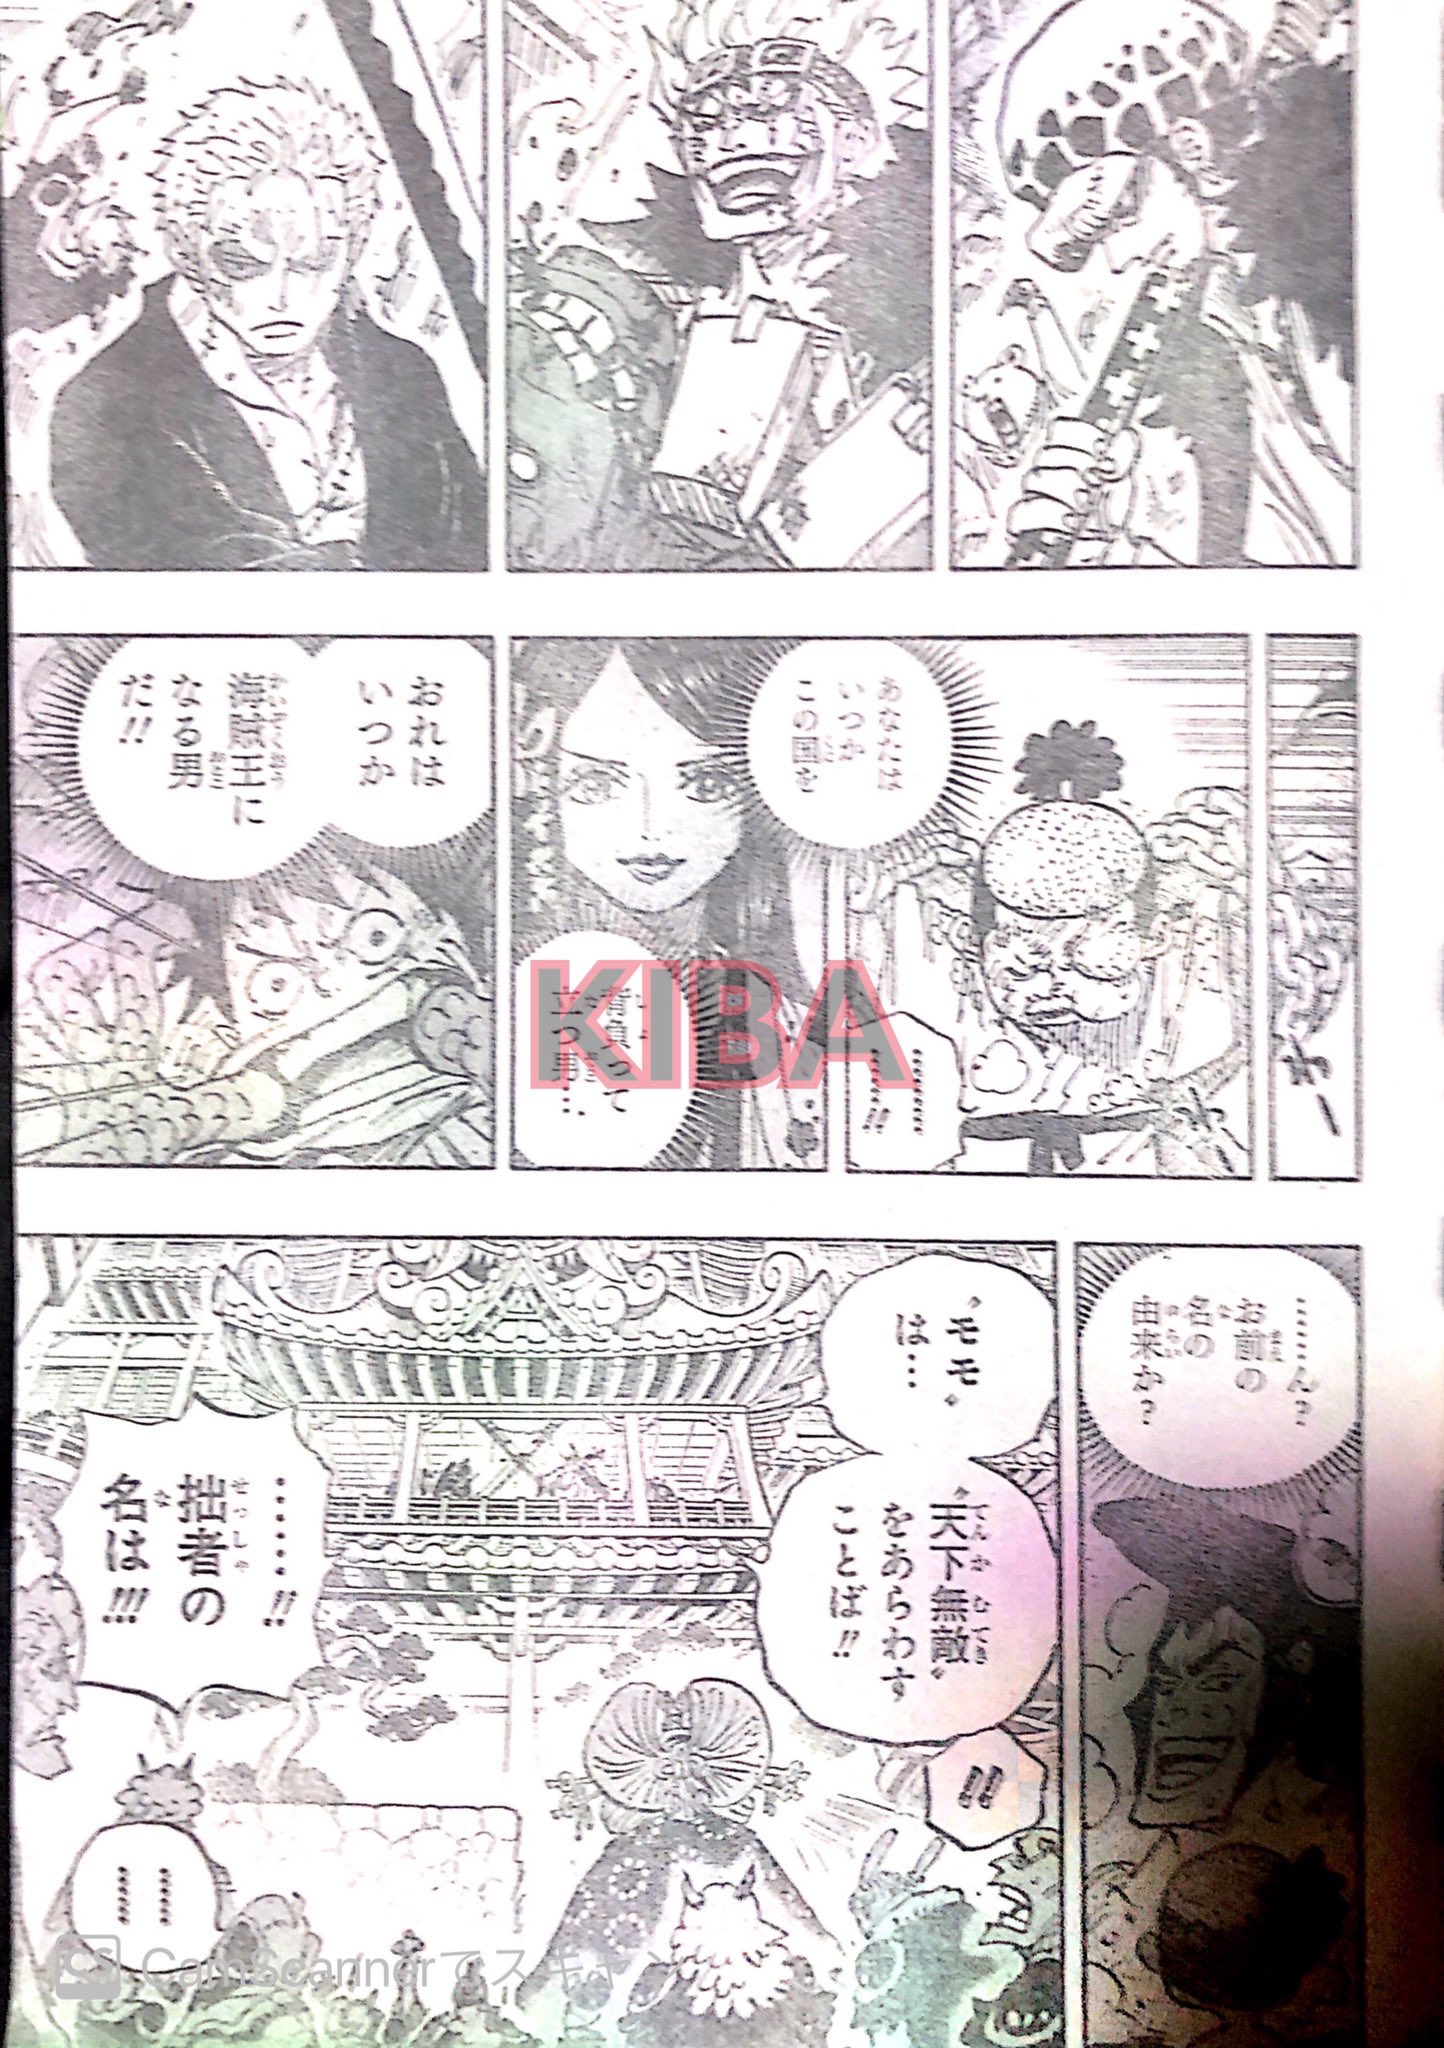 Spoiler One Piece Chapter 986 Spoilers Discussion Page 50 Worstgen